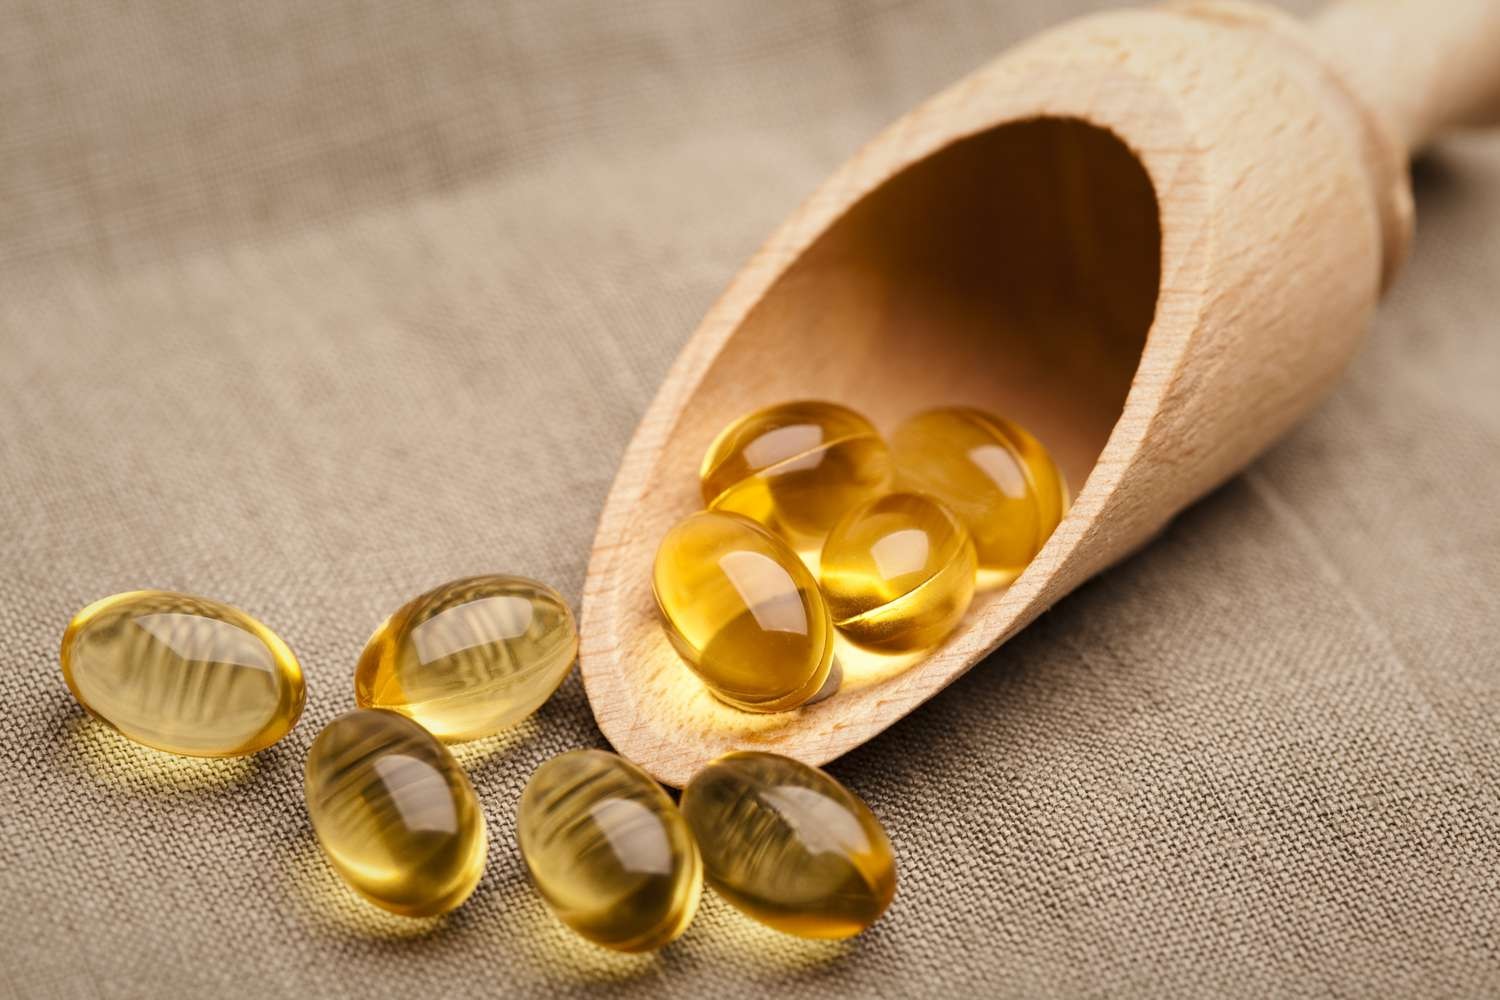 Why Do You Need to Take a Vitamin E Supplement?